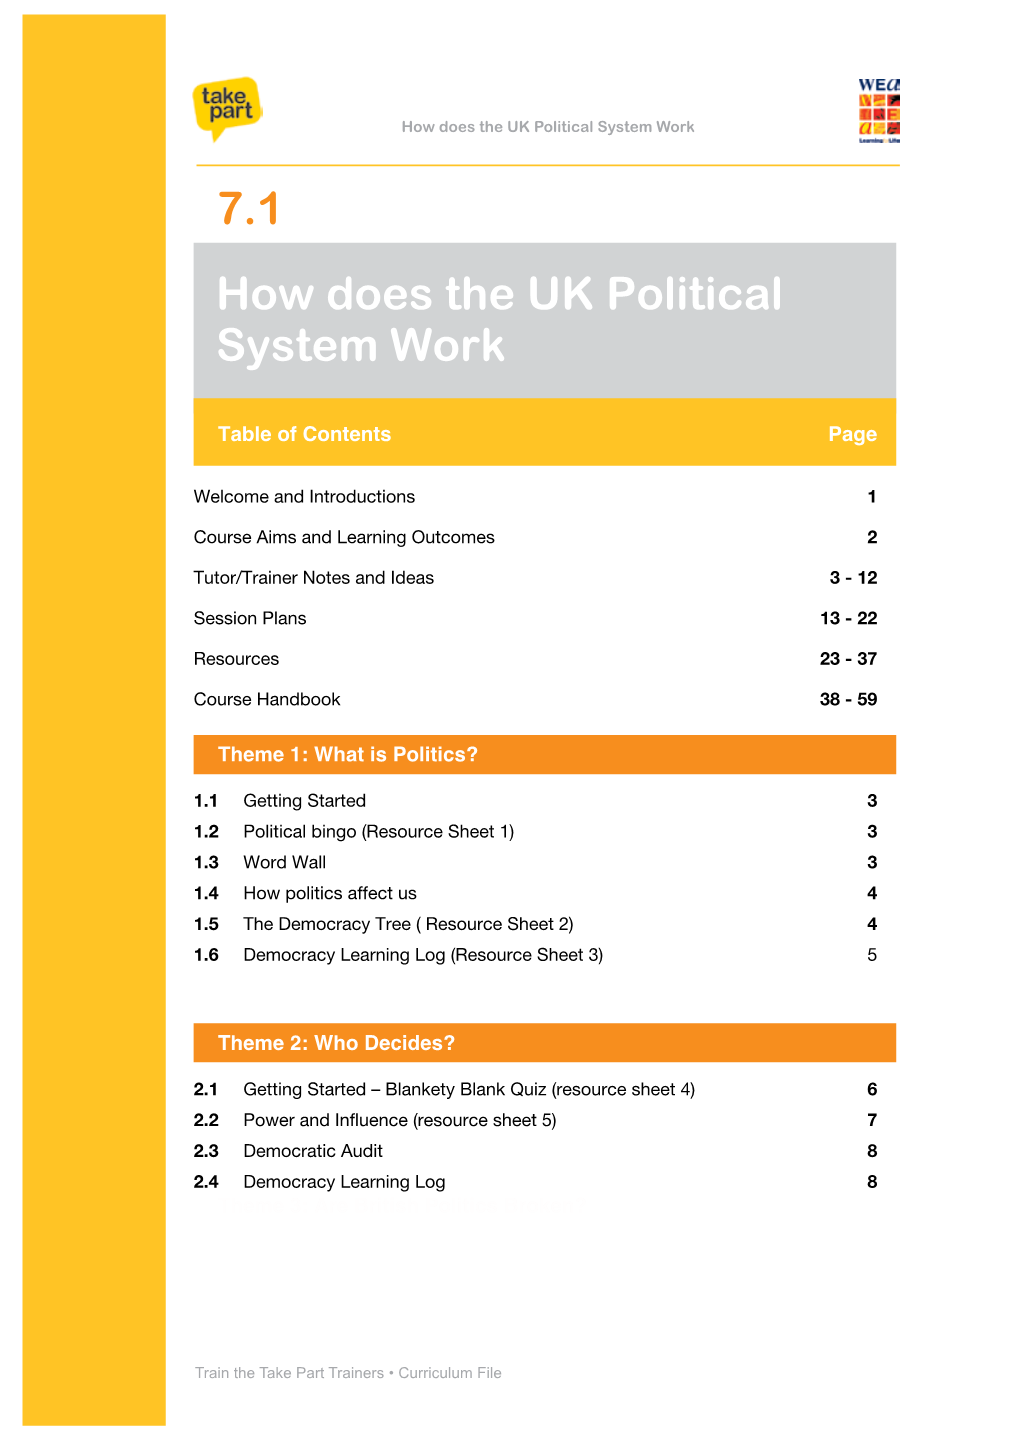 7.1 How Does the UK Political System Work